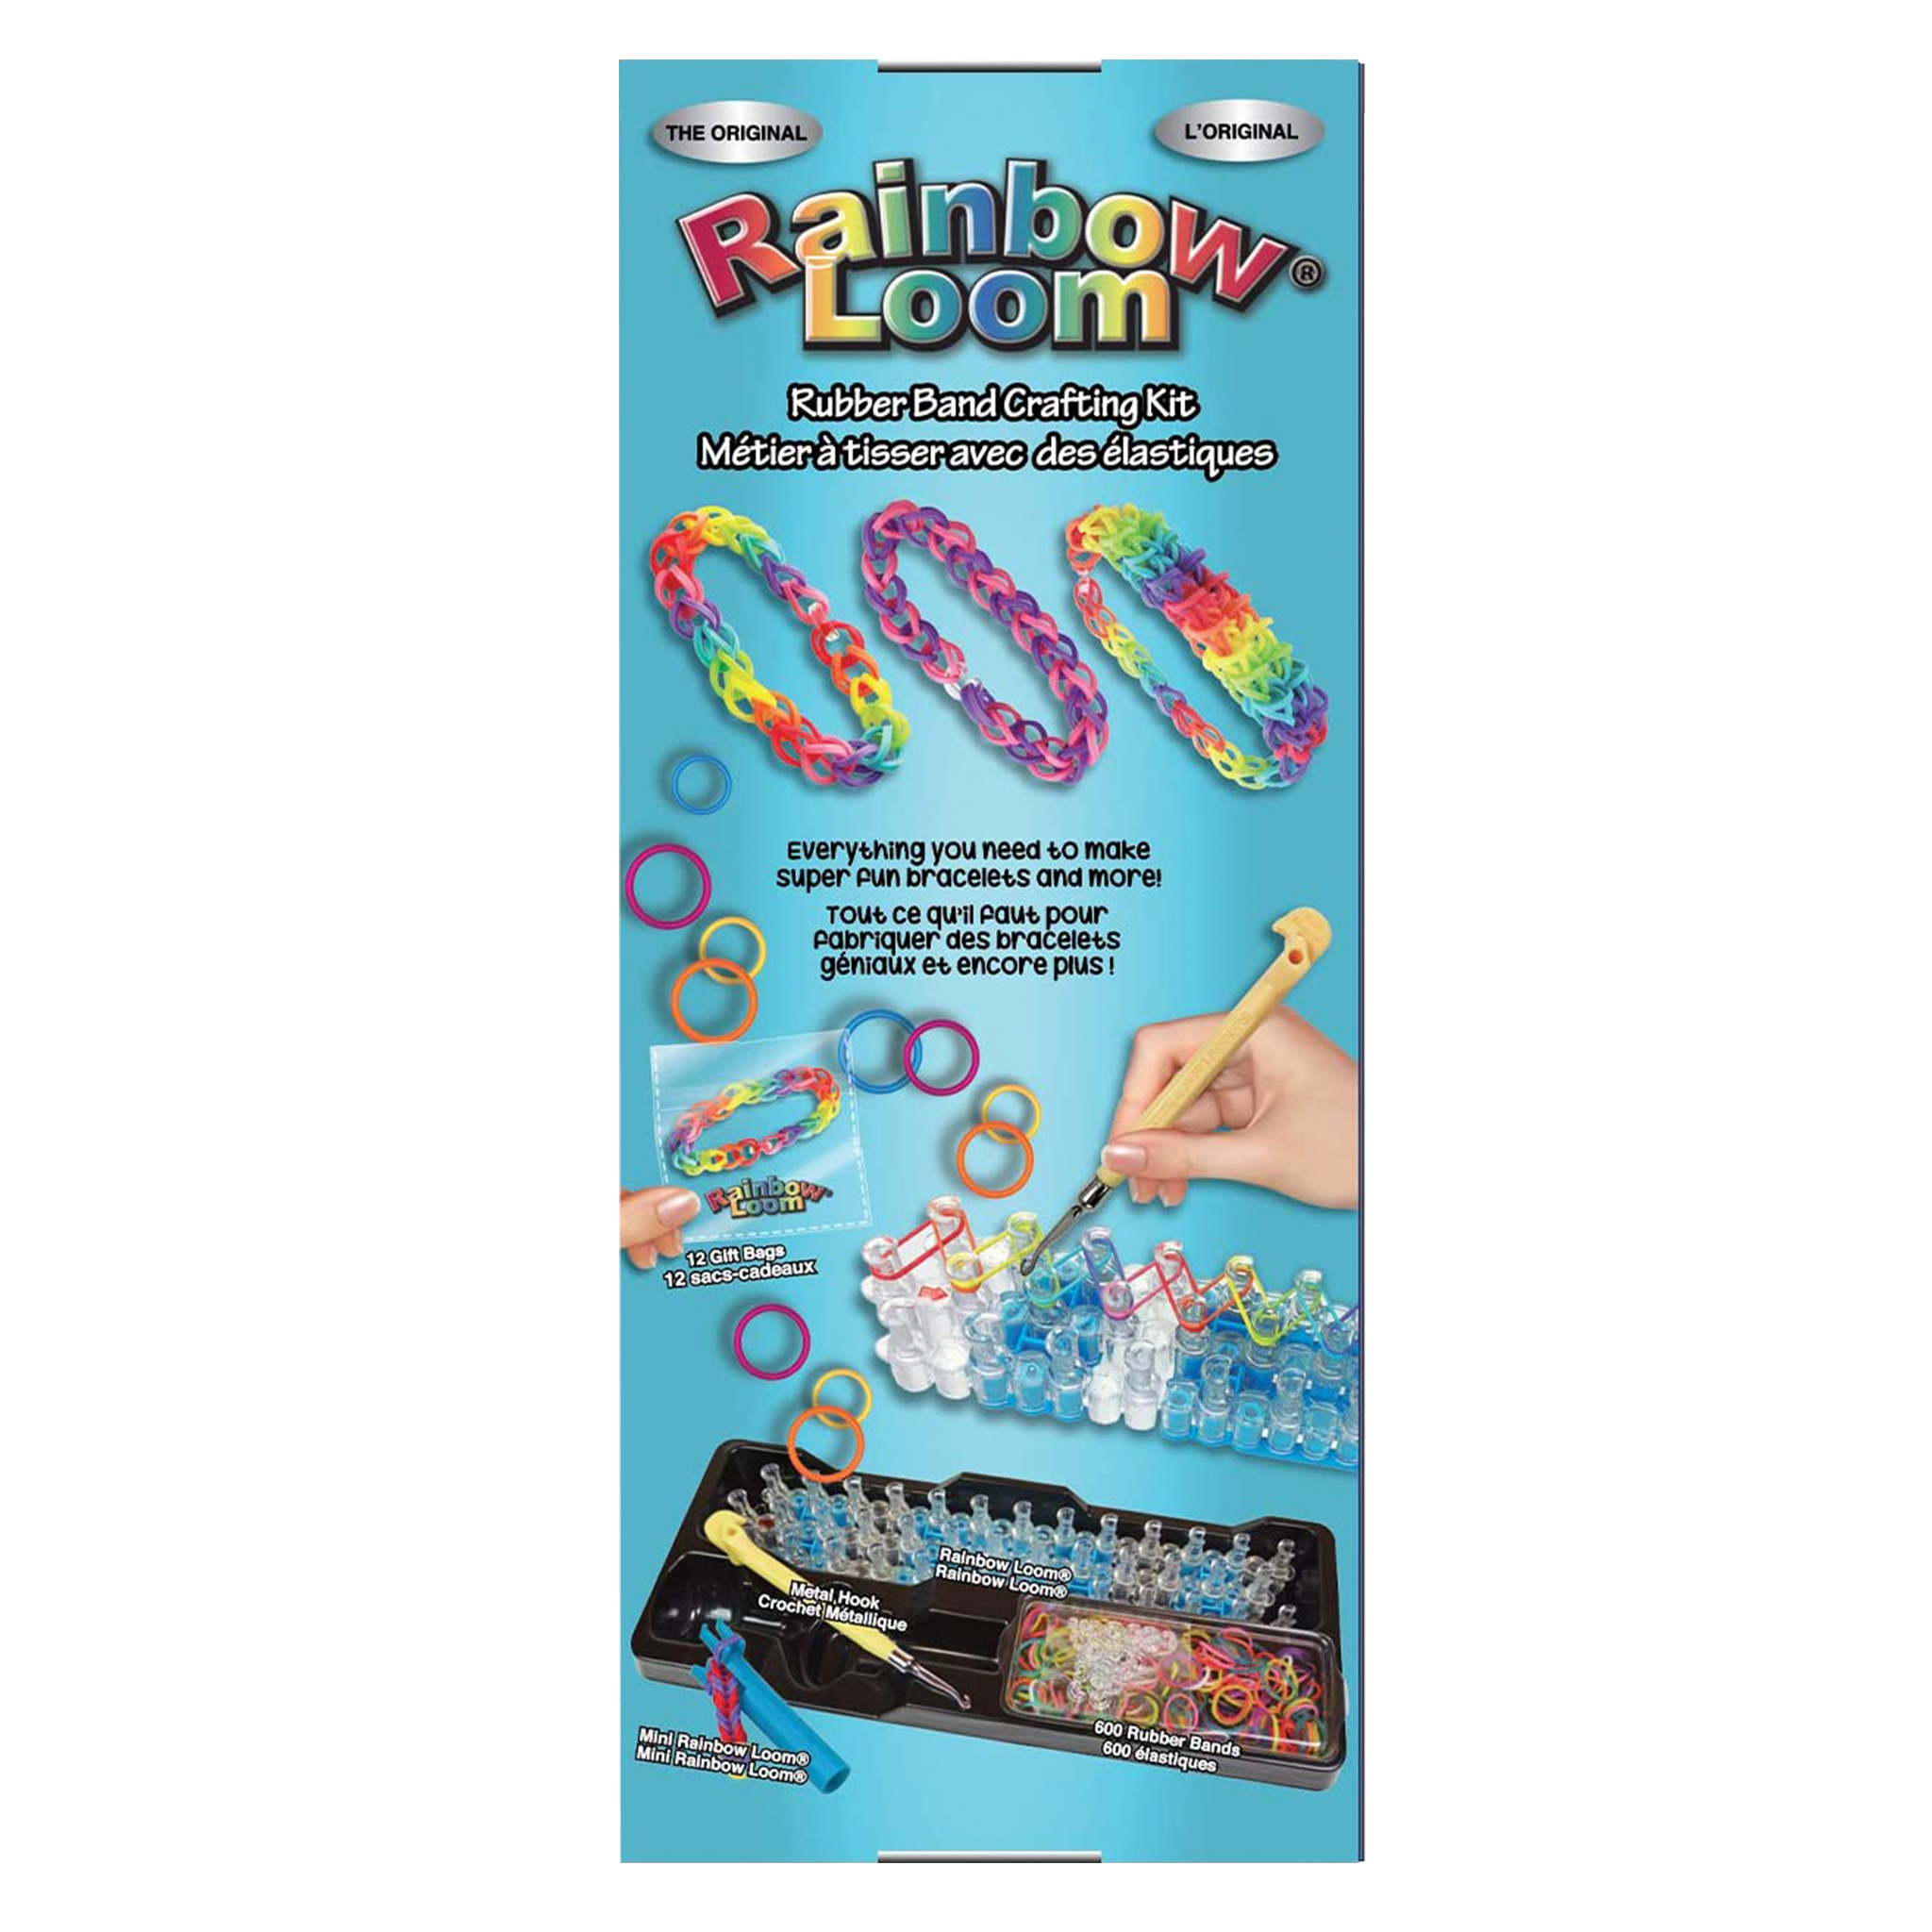 The Original Rainbow Loom Rubber Band Crafting Kit - JCPenney